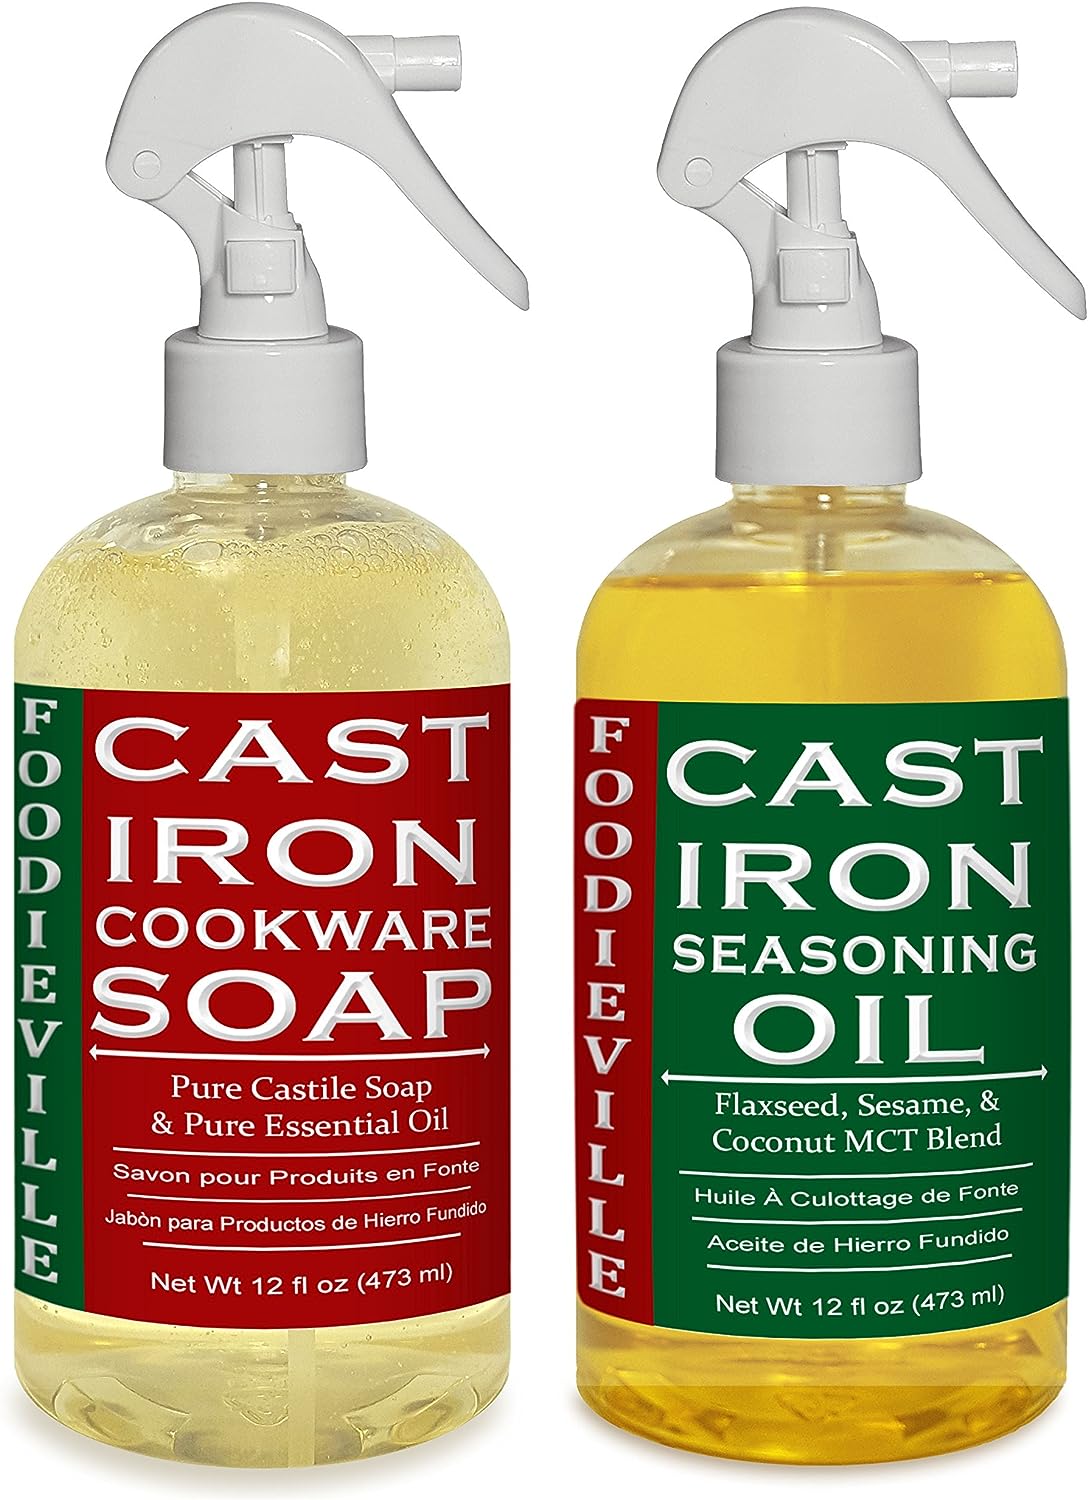 Culina Cast Iron Soap Set & Conditioning Oil & Stainless Scrubber | All Natural Ingredients | Best for Cleaning, Non-Stick Cooking & Restoring | for